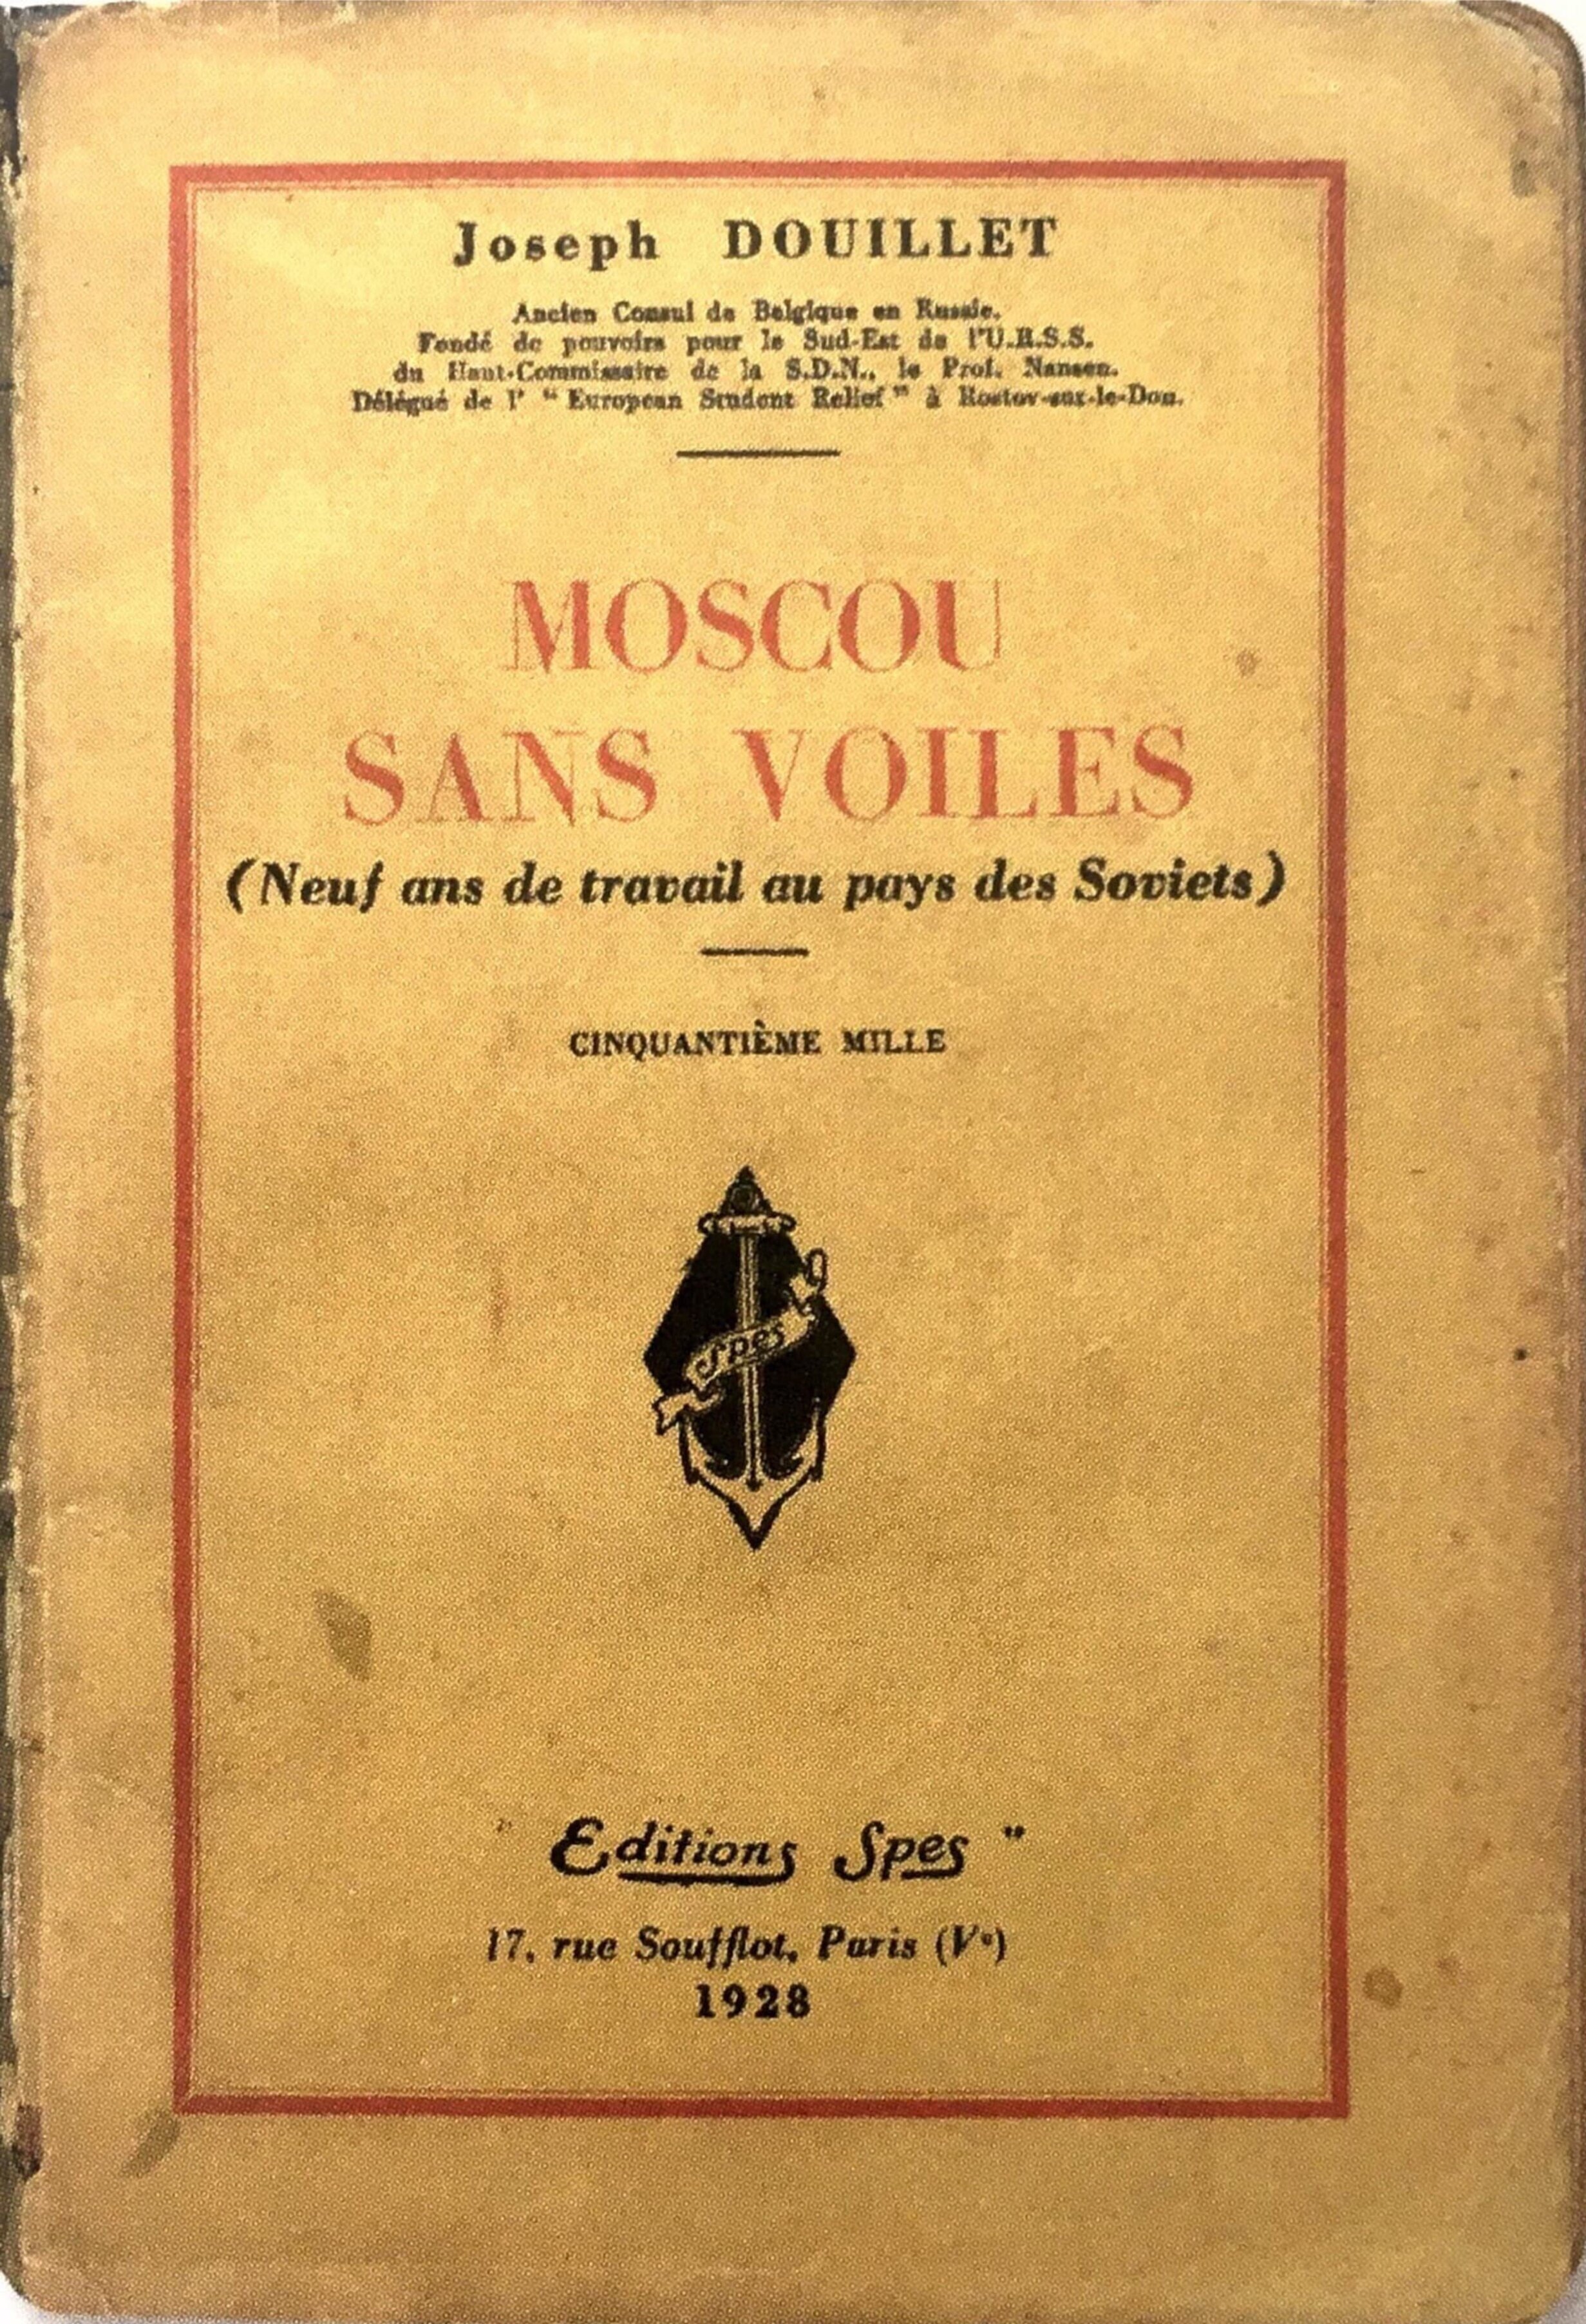  ‘Moscou Sans Violes’ ( Moscow Without Veils ) by Joseph Douillet. This book would be Herge’s primary source of information when depicting Soviet Russia. 